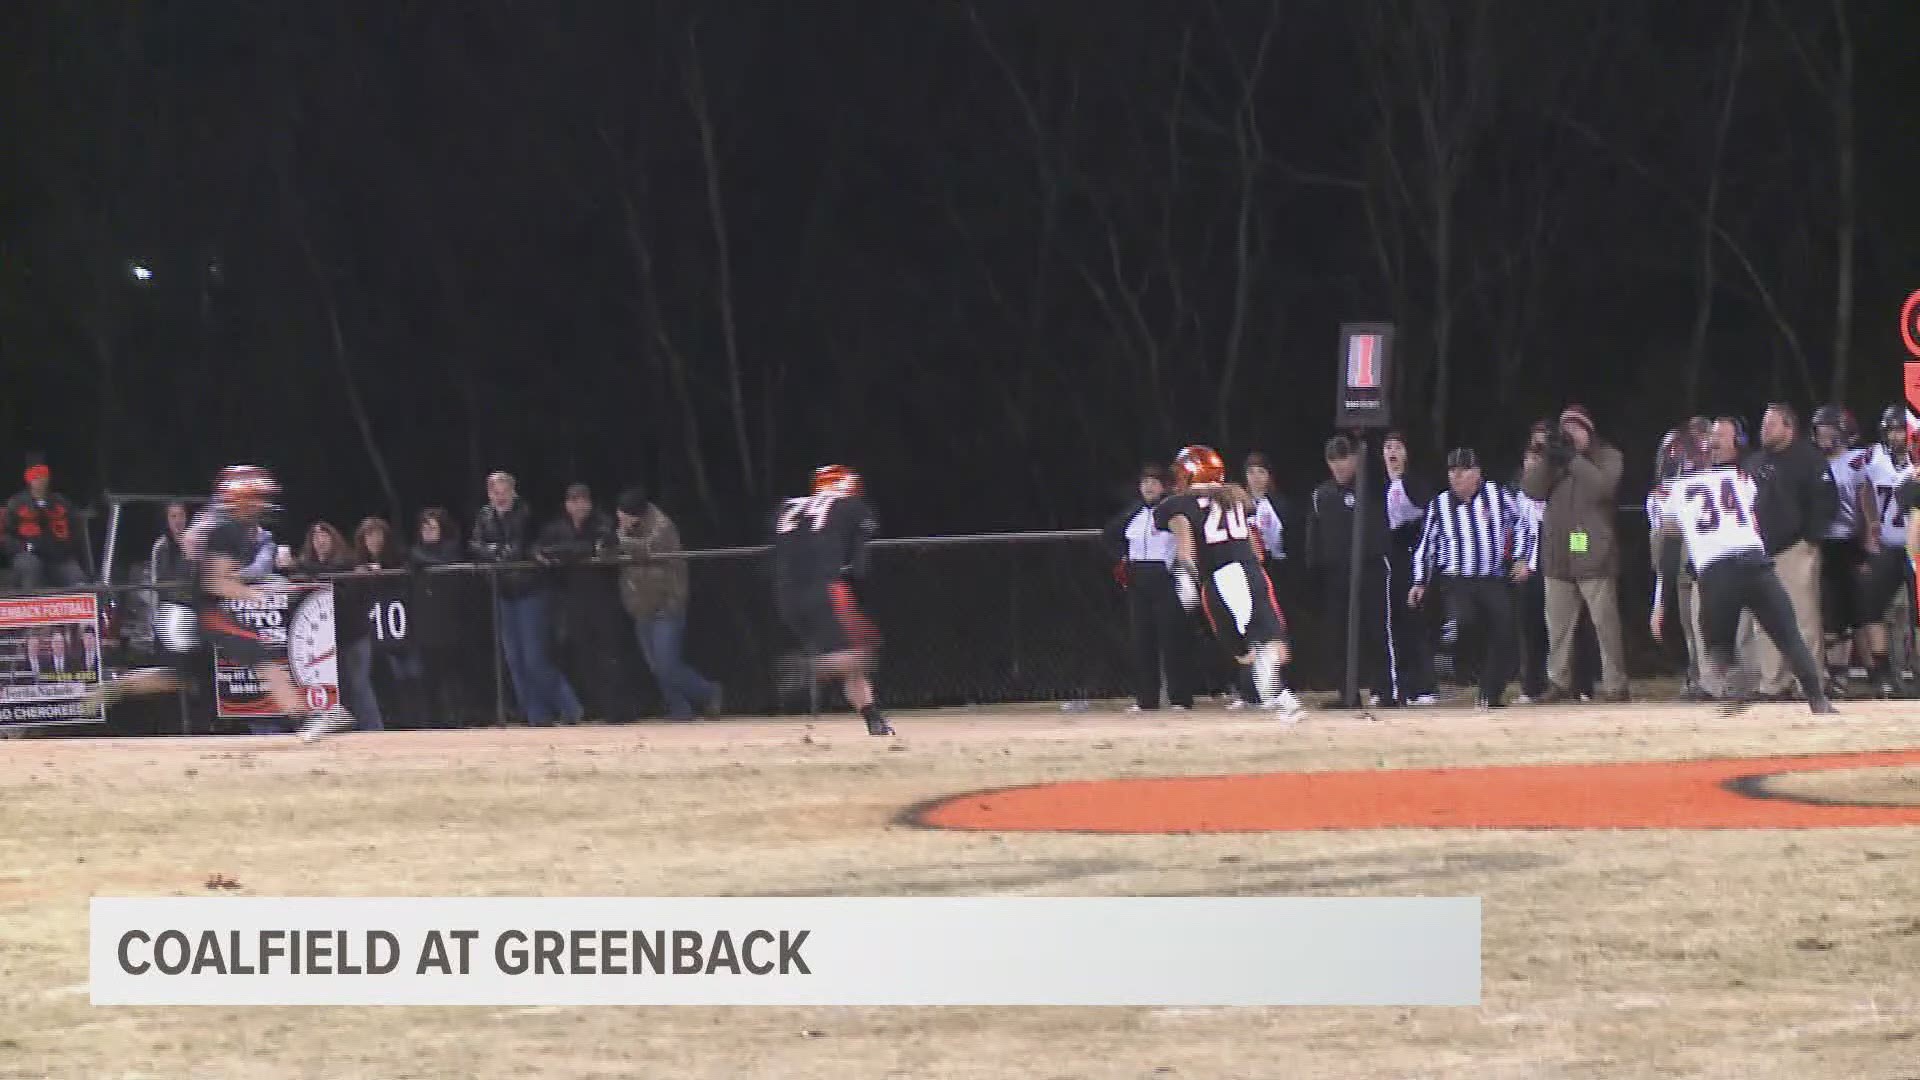 Greenback stays undefeated with a win over rival Coalfield. The Cherokees will play Whitwell in the semi finals.